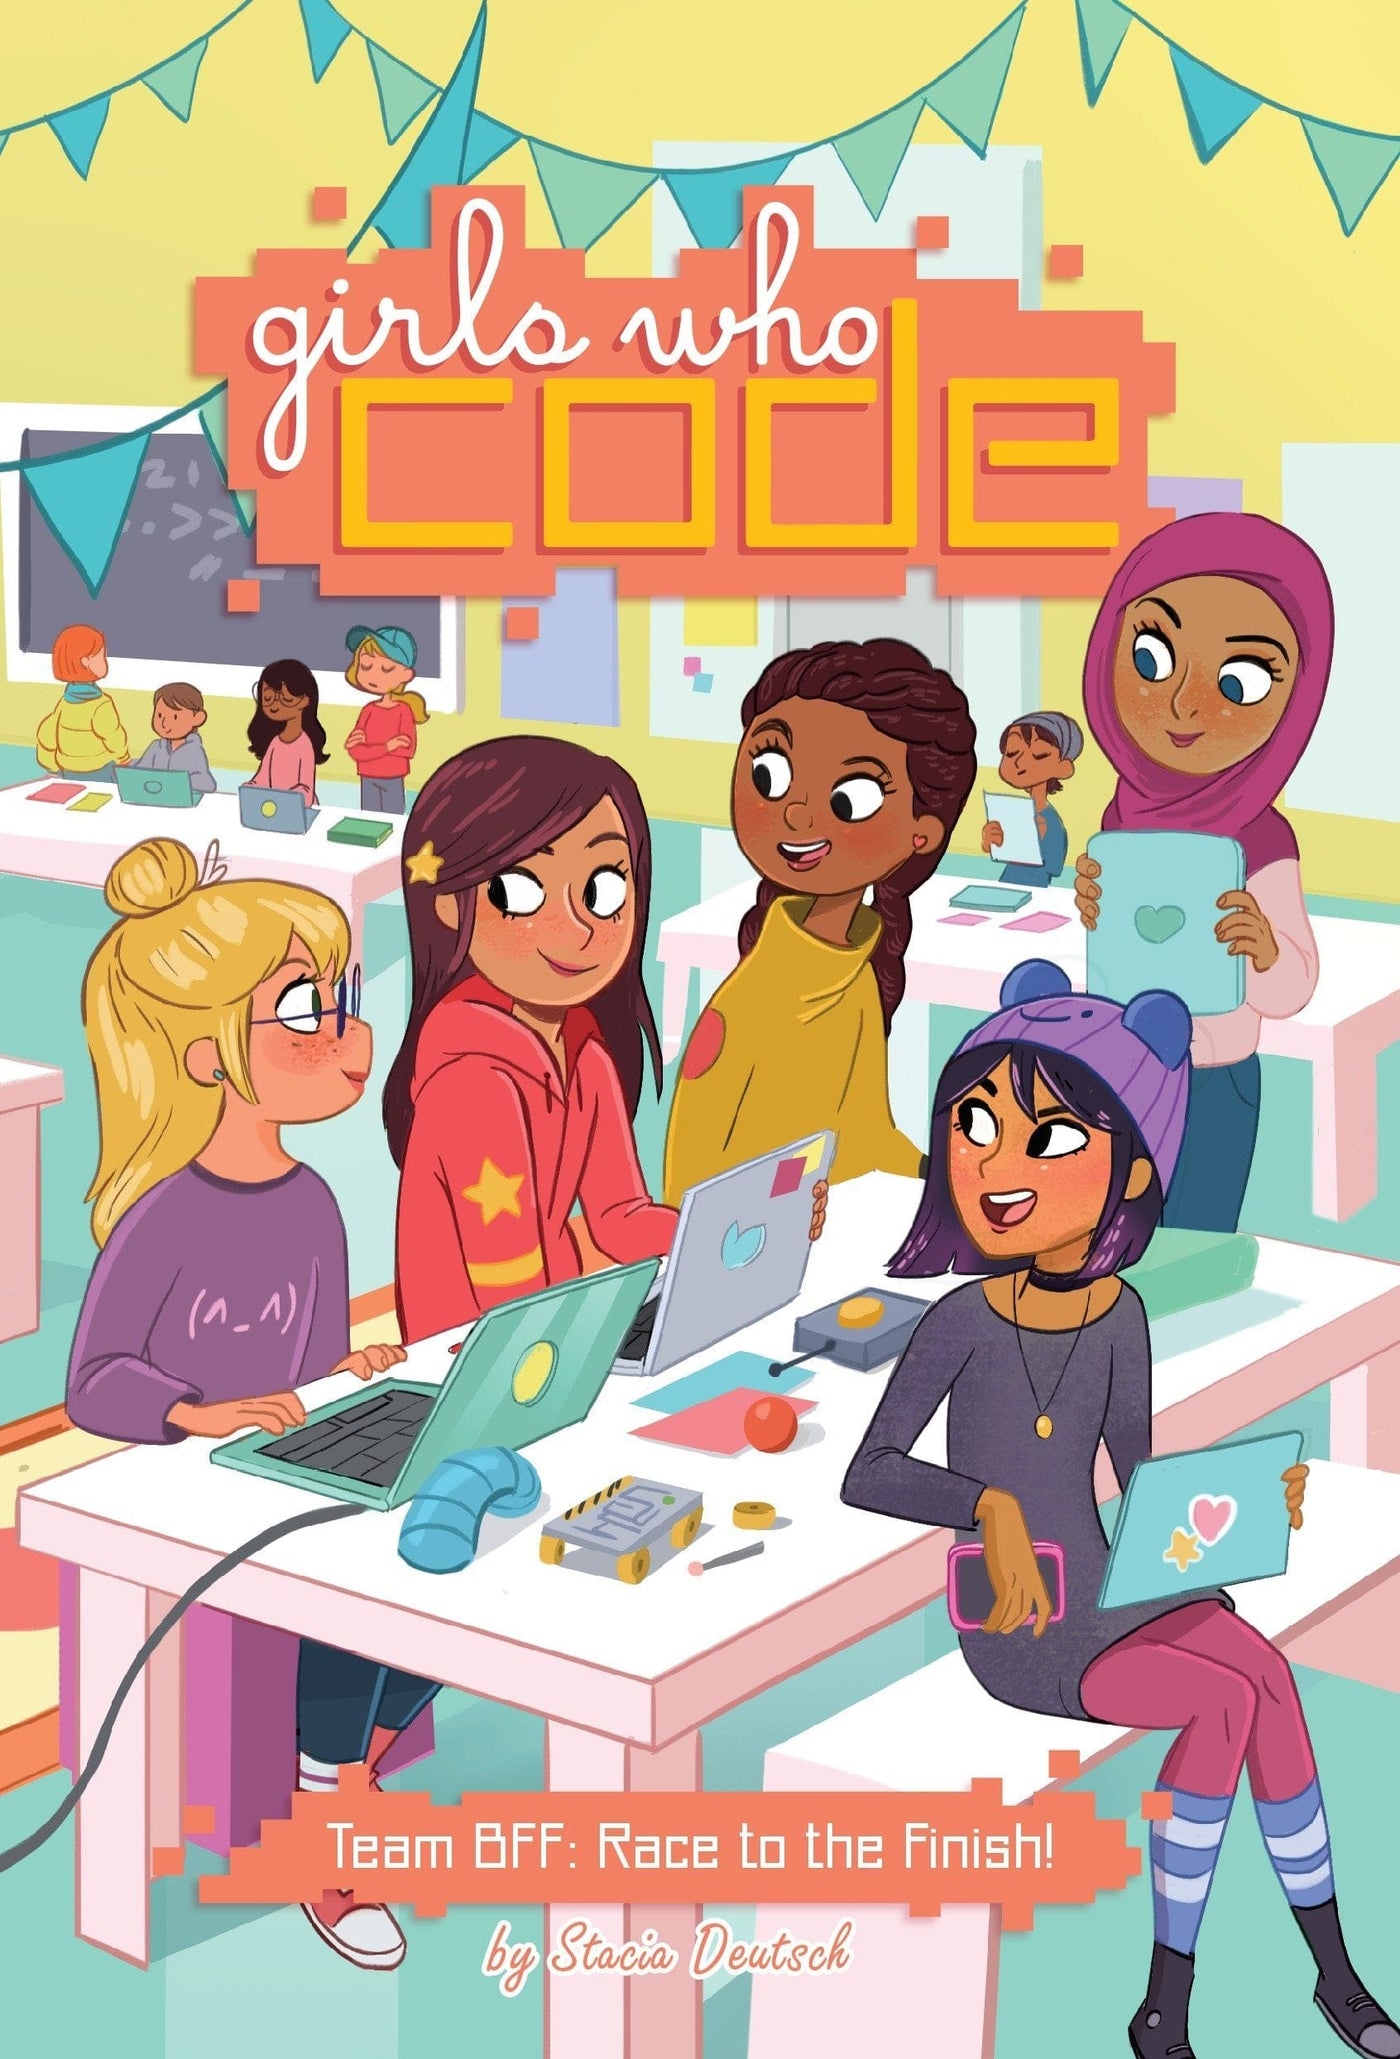 Team BFF: Race to the Finish! #2 (Girls Who Code) Hardcover | Stacia Deutsch by Penguin Random House Book